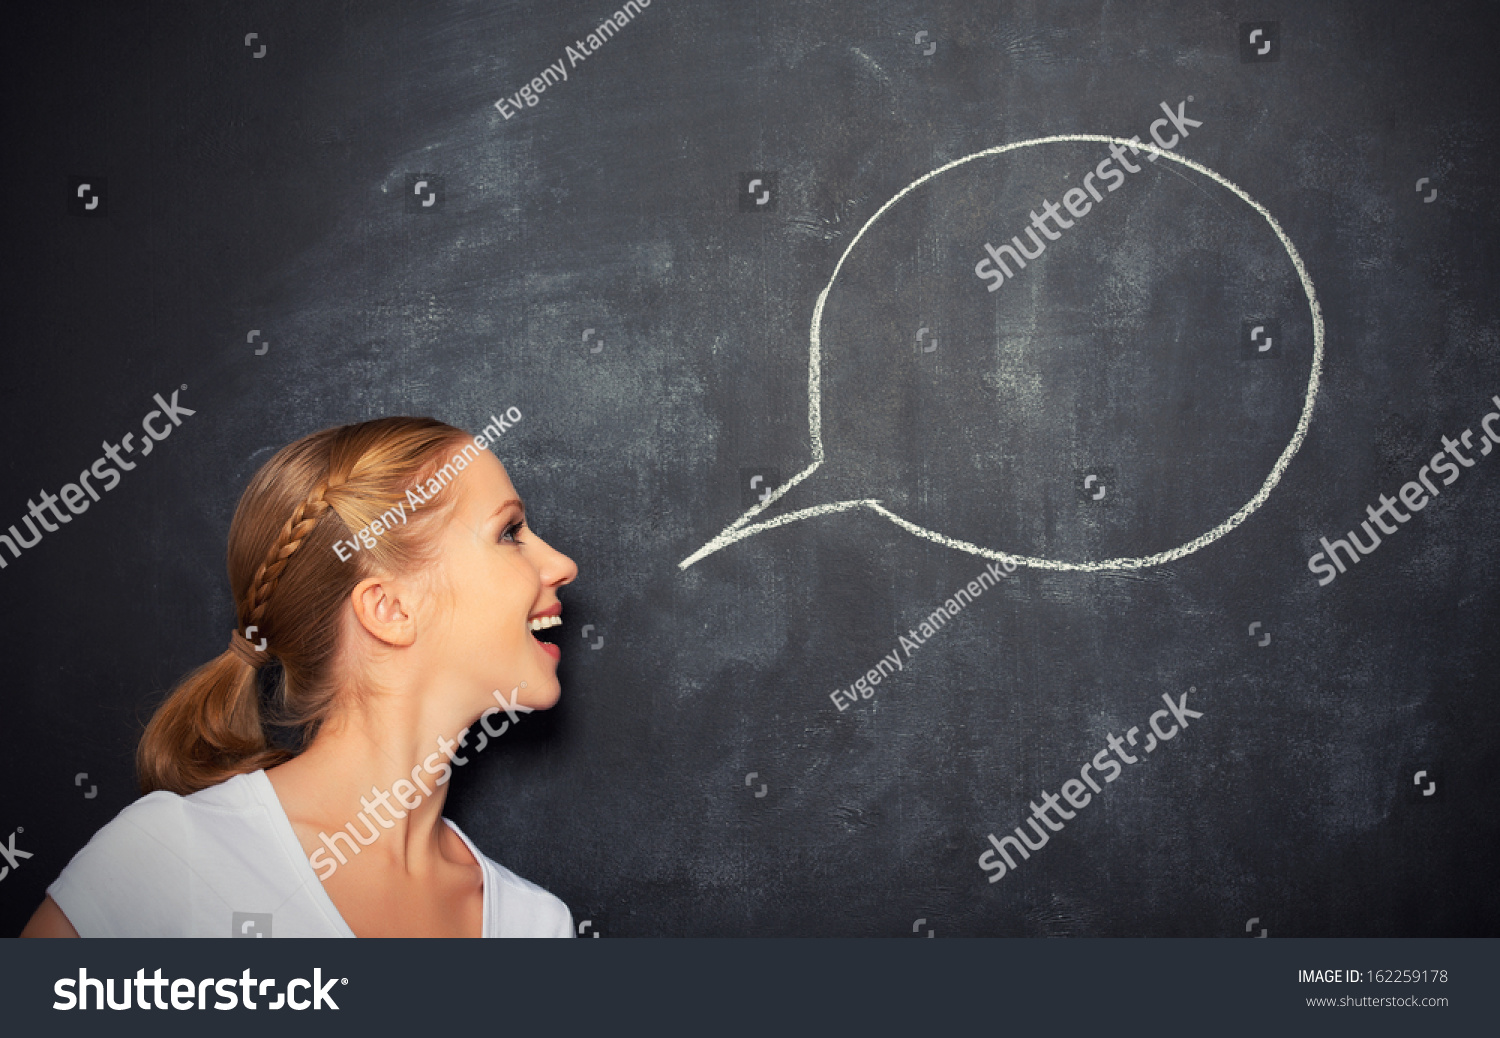 Concept woman said at a blank blackboard with chalk painted icon #162259178